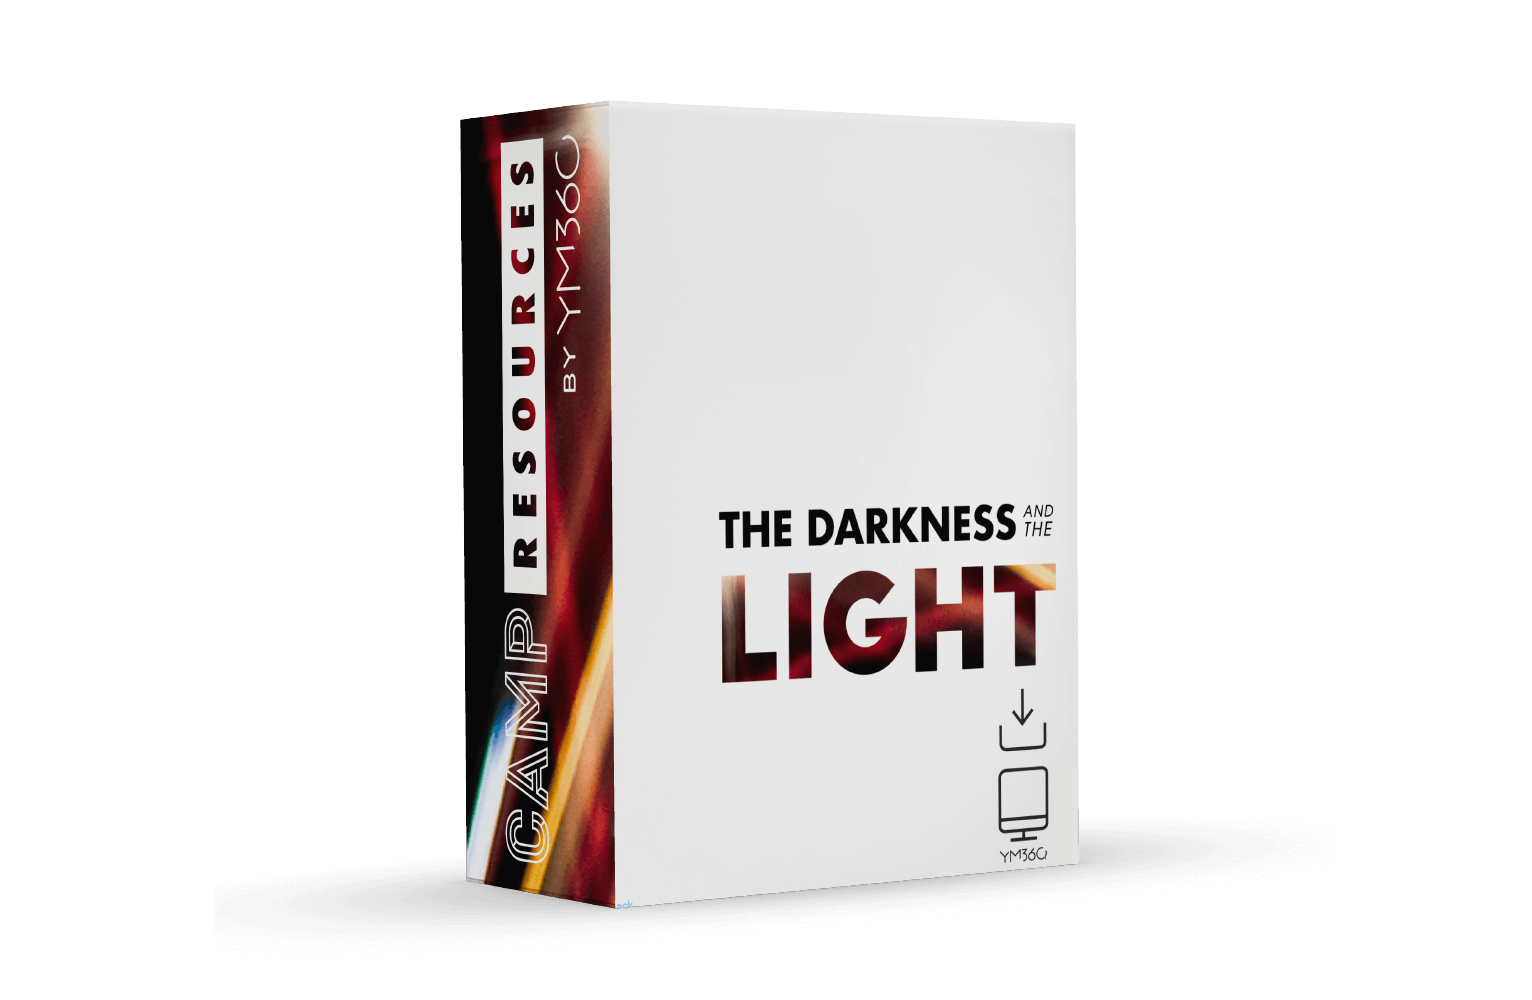 [Summer Camp Edition] The Darkness and the Light